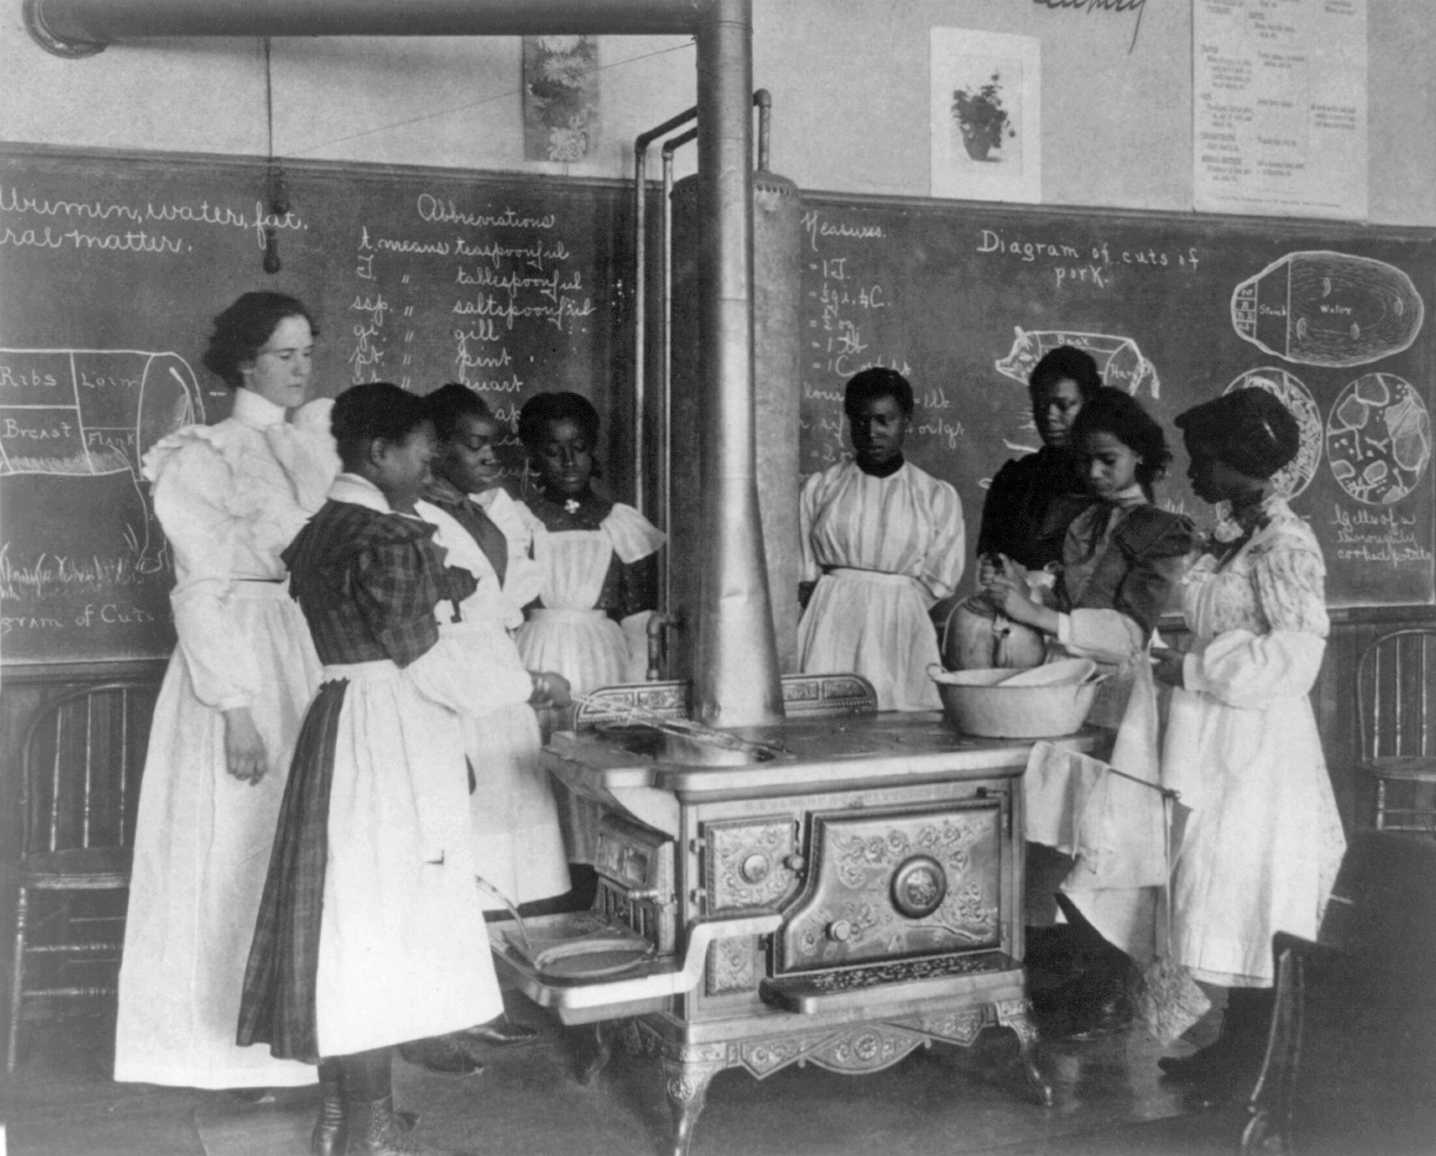 Frances+Benjamin+Johnston+-+African+American+schoolgirls+with+teacher,+learning+to+cook+on+a+wood+stove+in+classroom,+1899.jpg